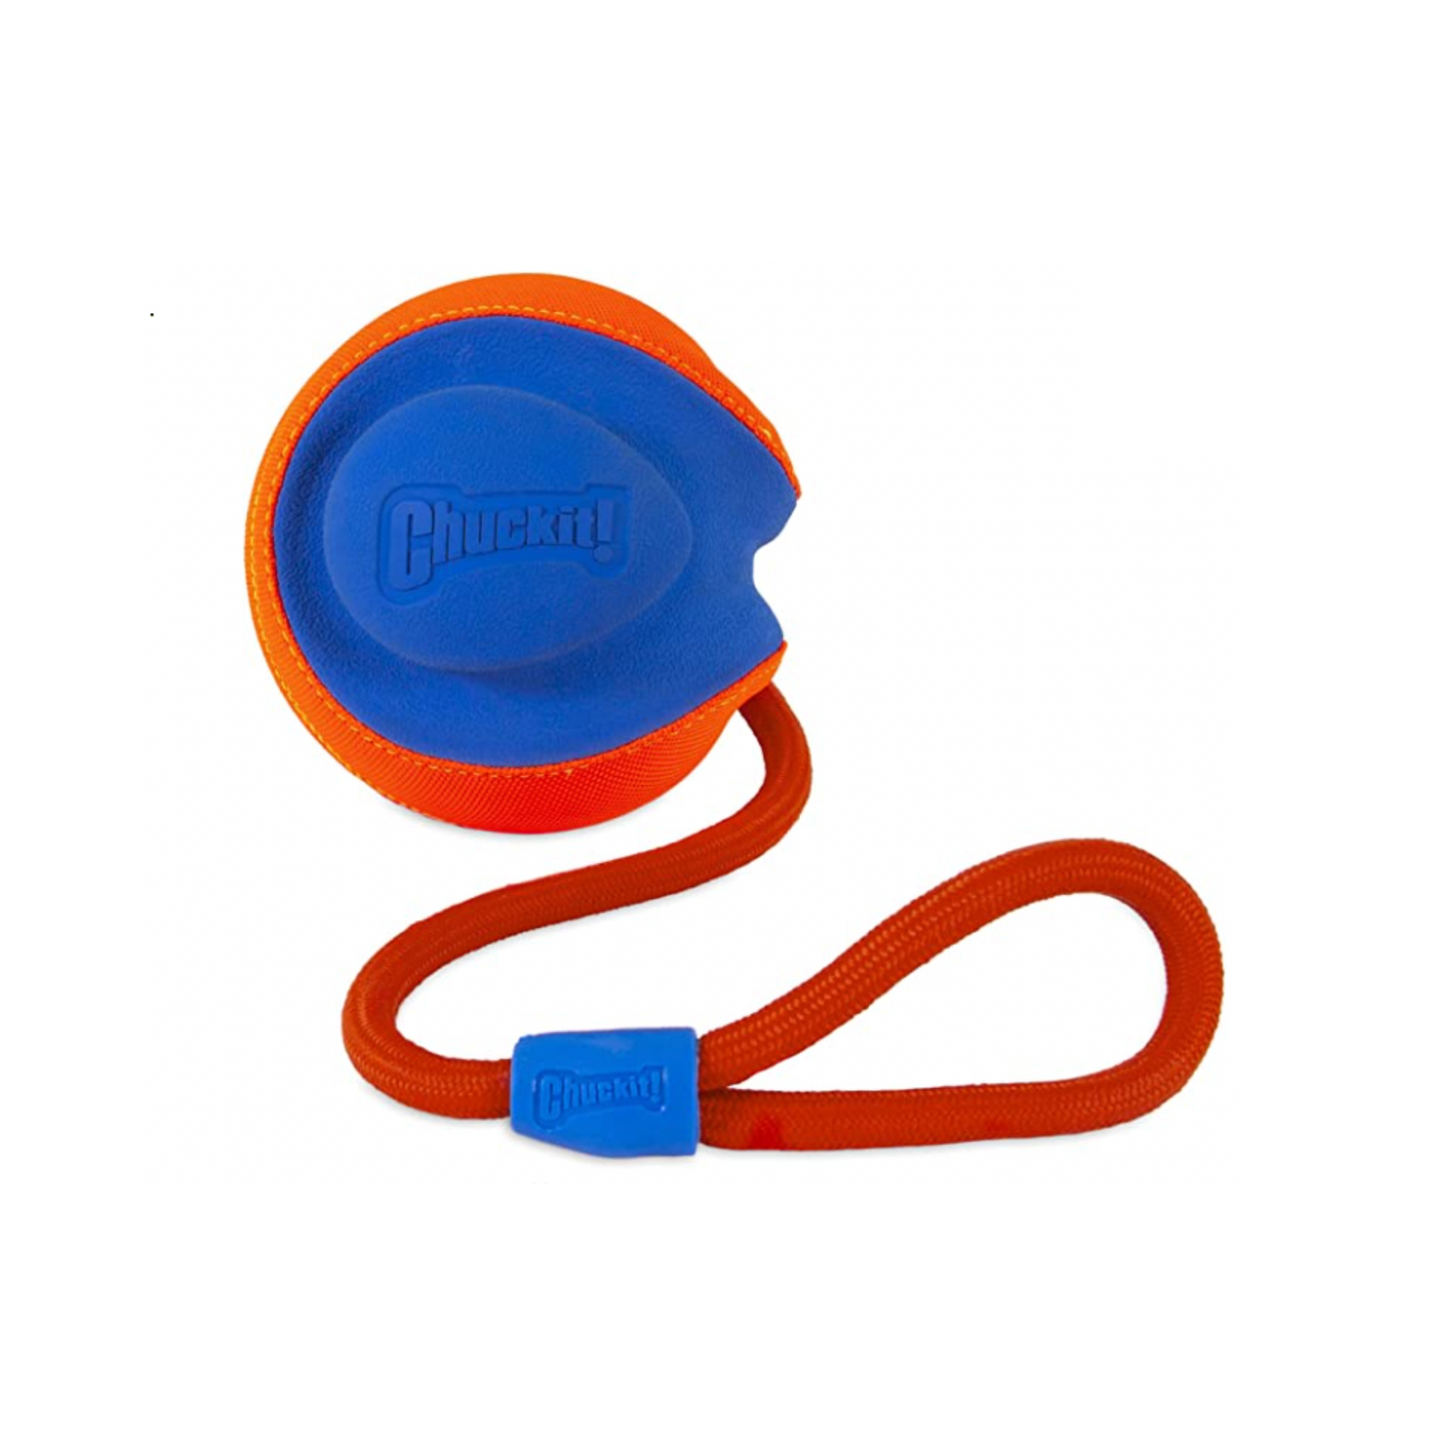 Chuckit Rope Fetch Ball On Rope Durable Dog Tug Toy